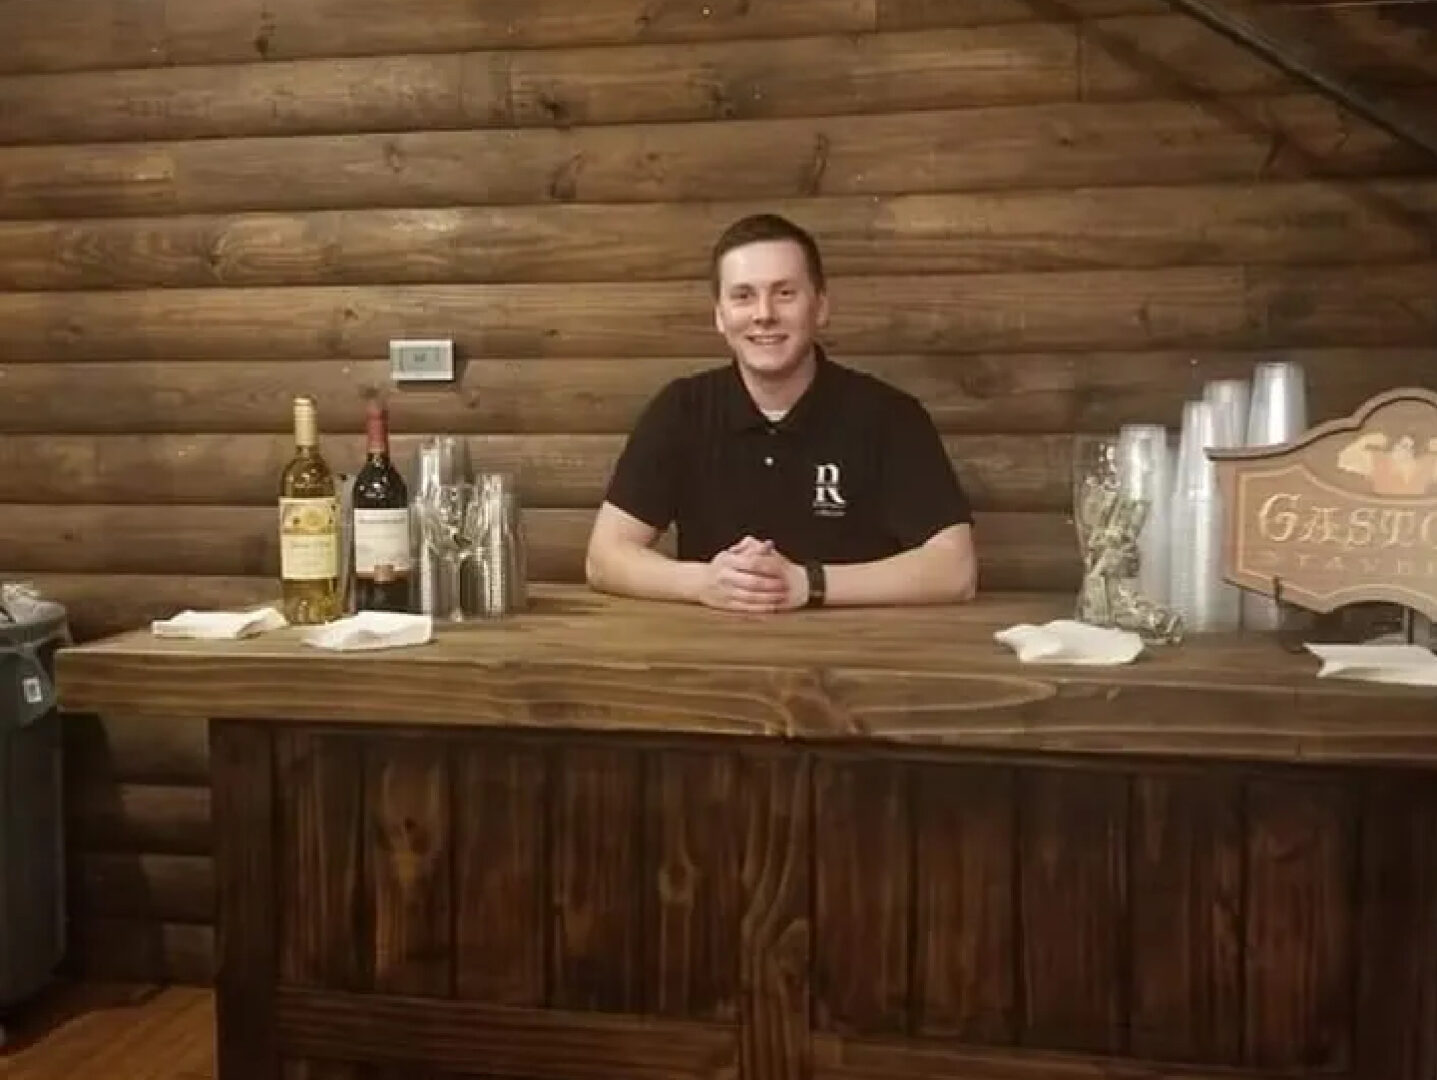 Man wearing a black polo shirt standing behind a wooden bar table in a cabin-like room